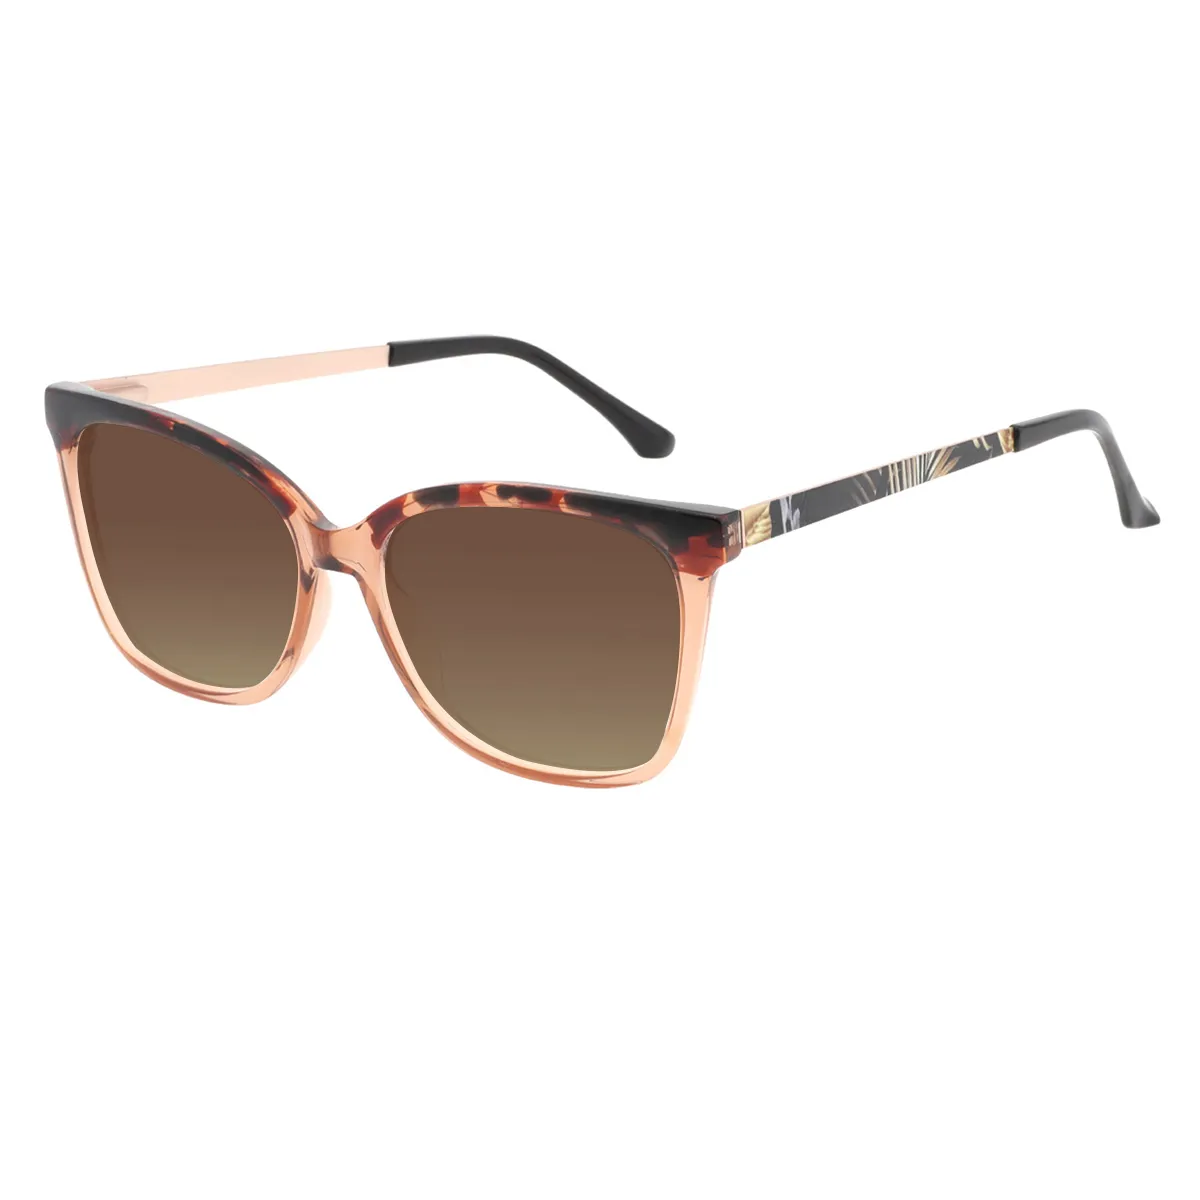 Ophelia - Square Brown Sunglasses for Women